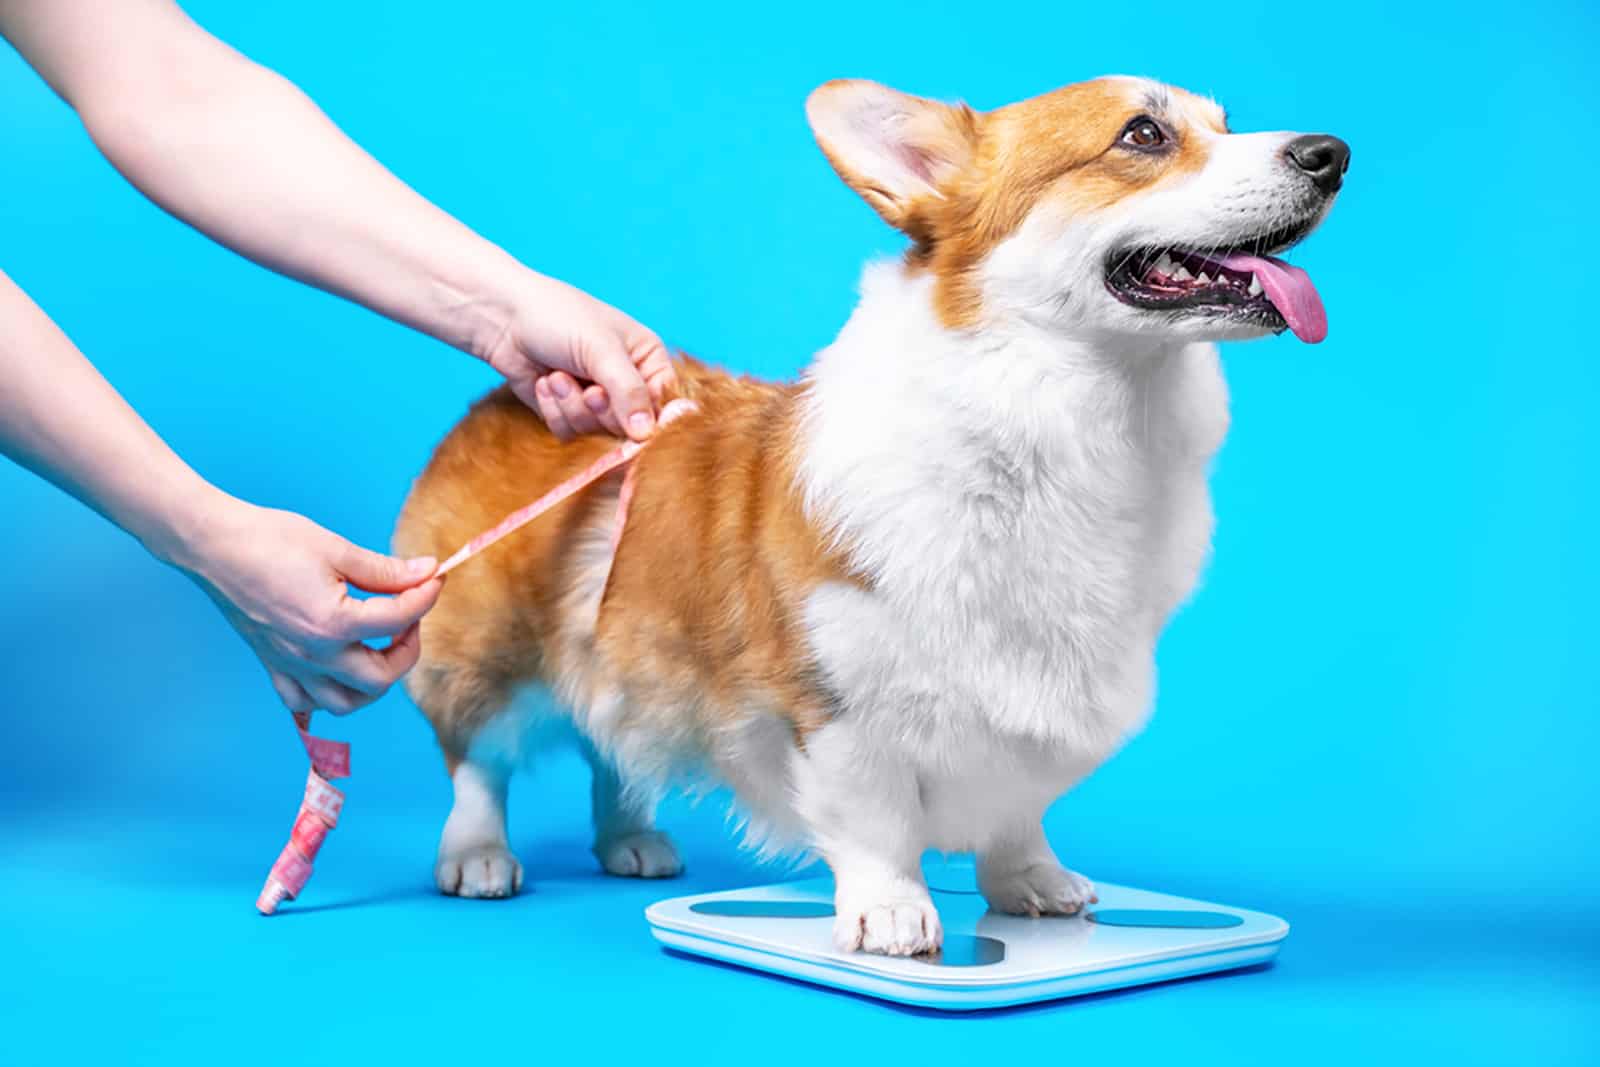 corgi dog standing on a scale while woman measuring him with a tape